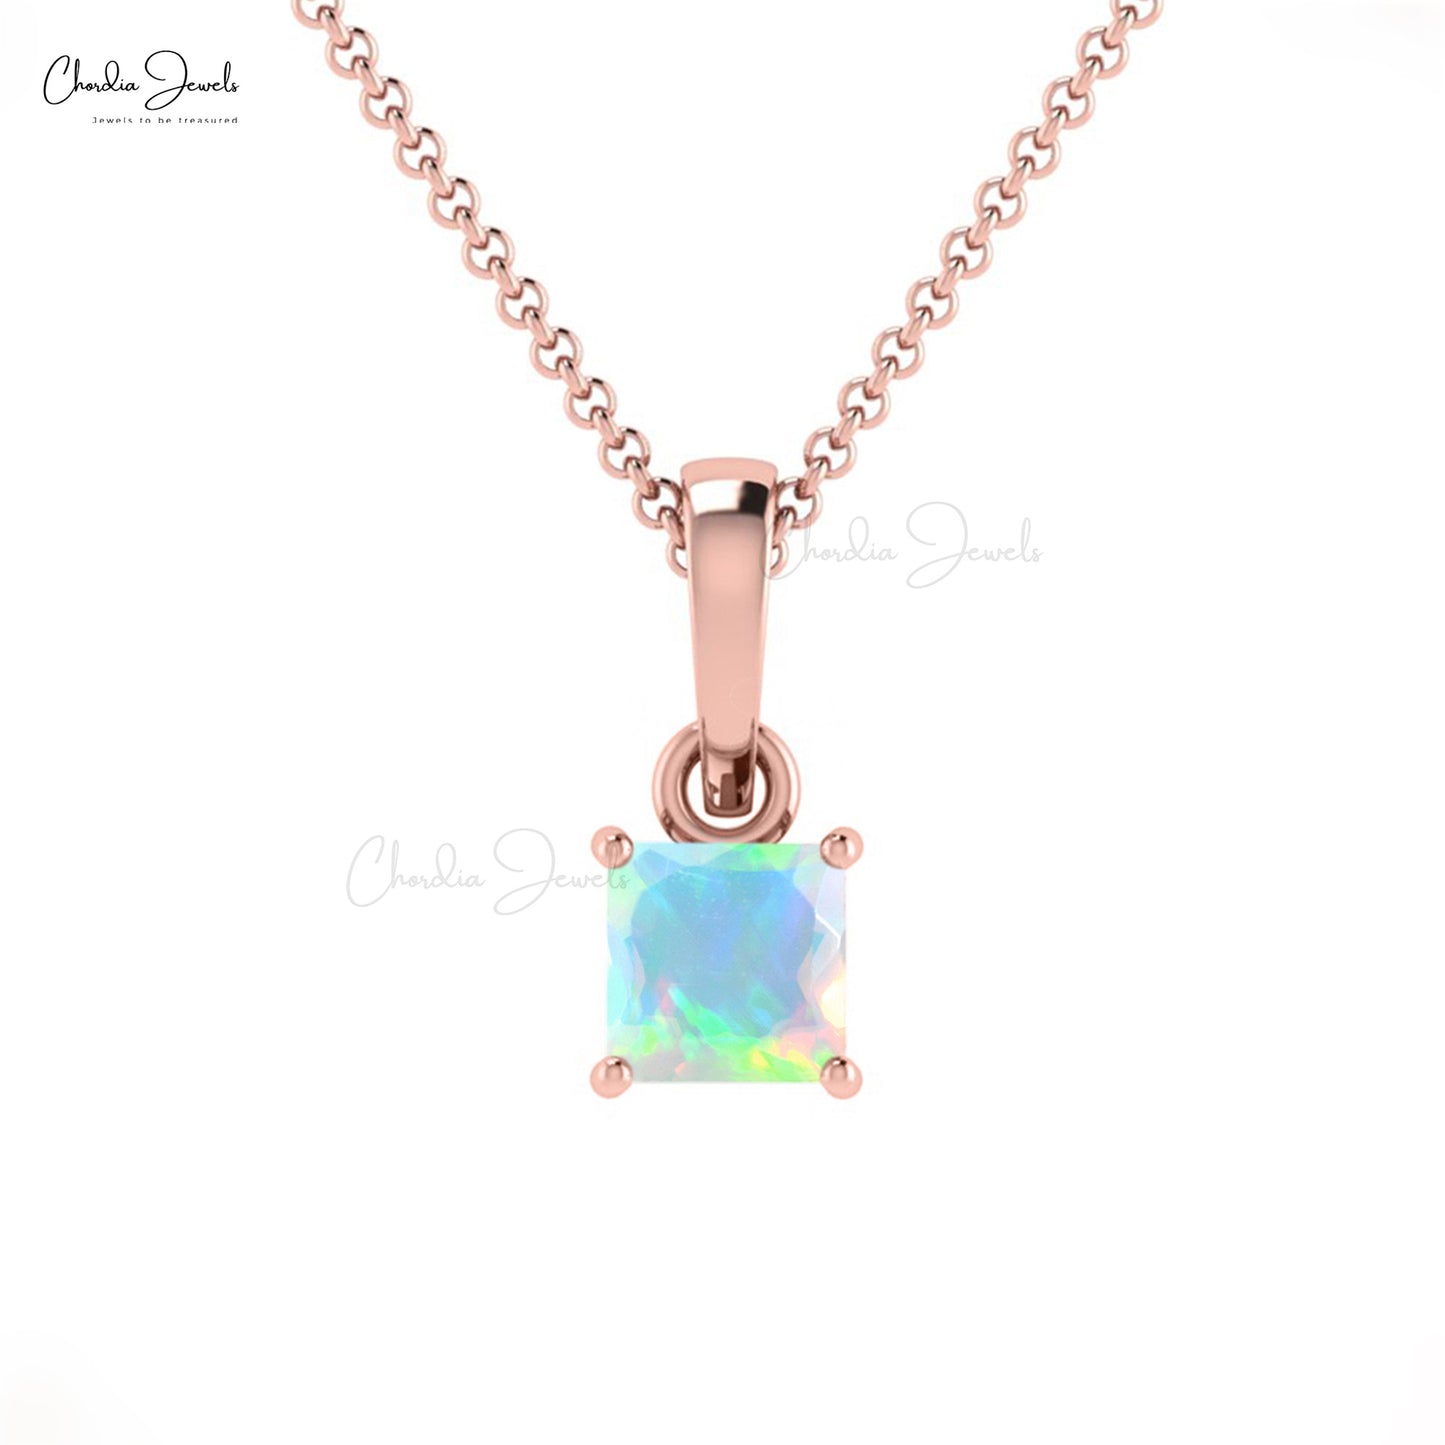 Authentic Ethiopian Fire Opal Pendant Necklace October Birthstone Gemstone Pendant in 14k Pure Gold Hallmarked Jewelry For Women